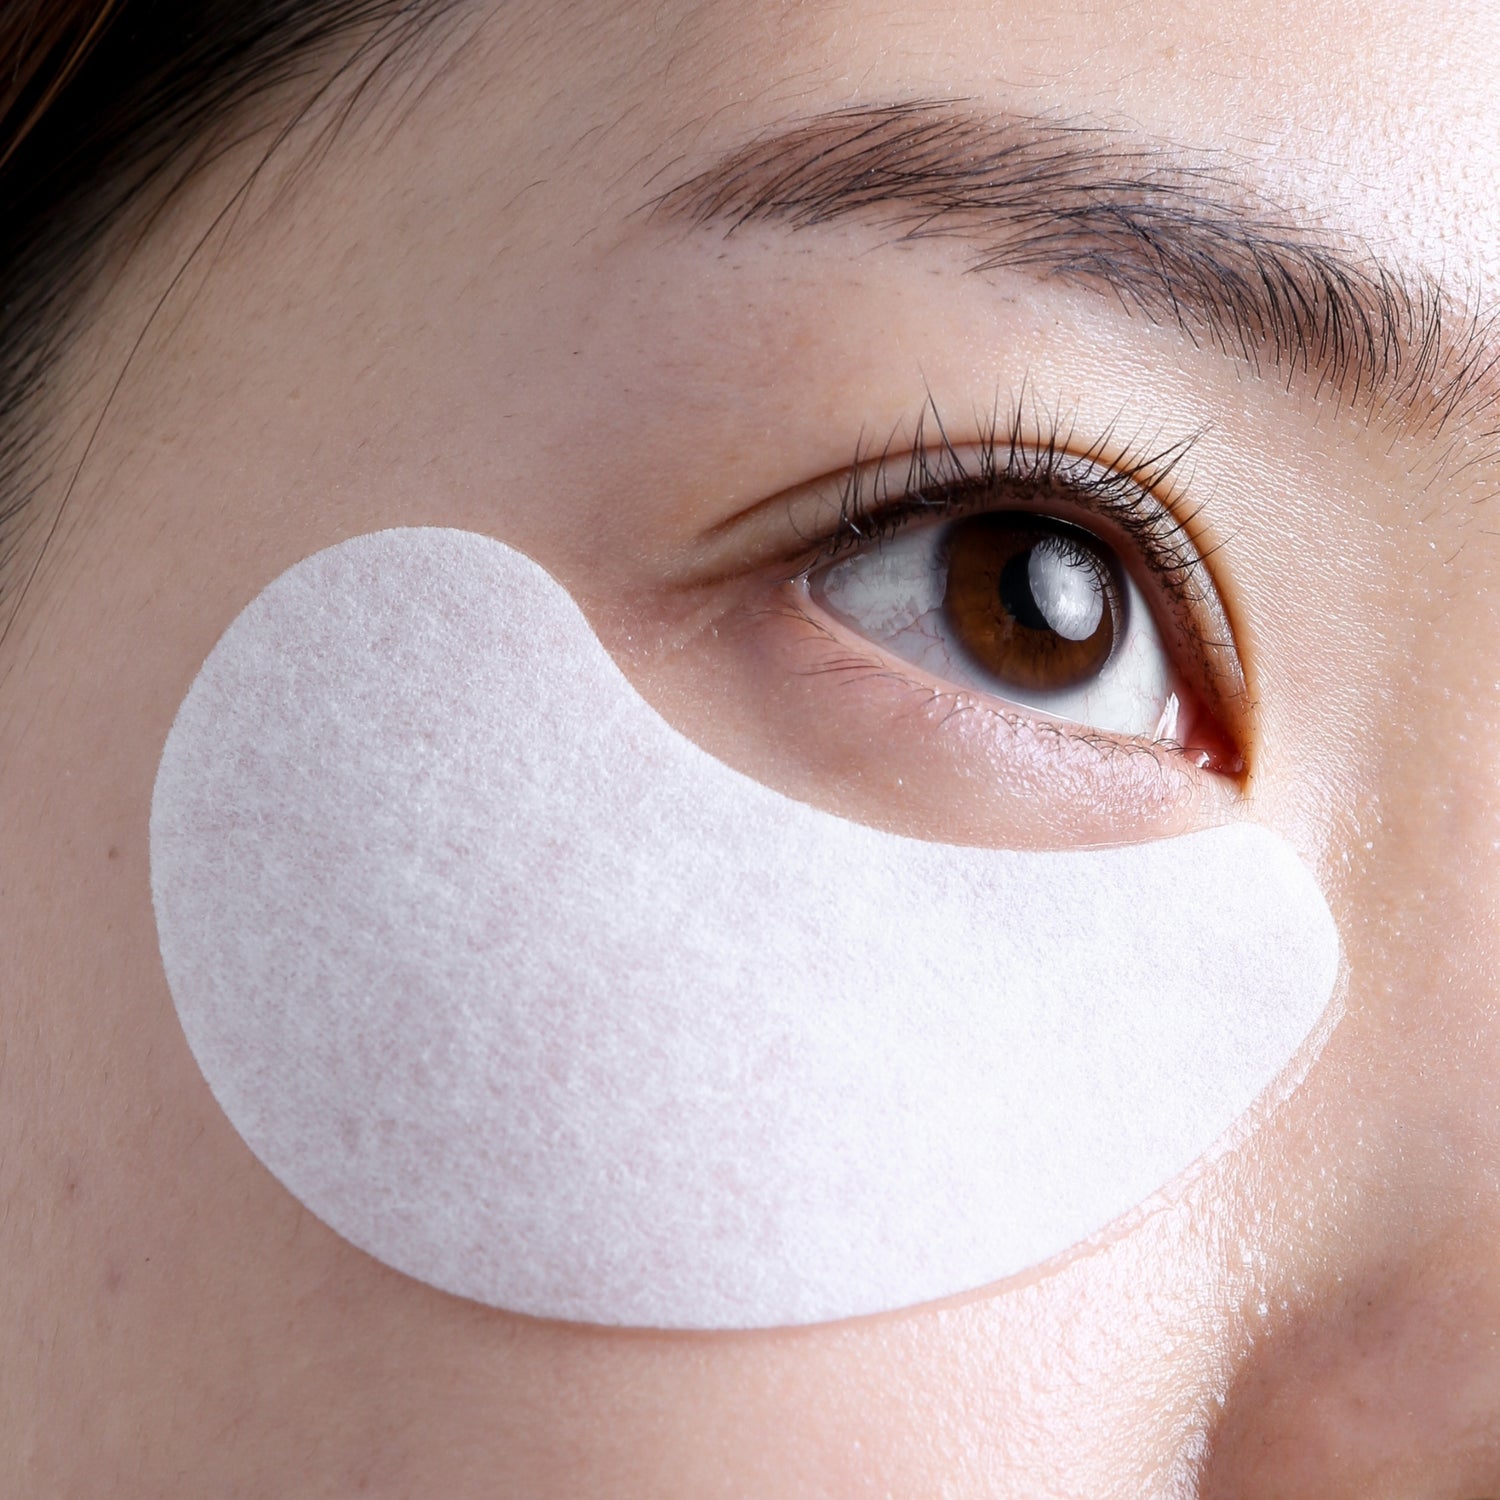  TGF-β EYE FIRMING MASK from Le Mieux Skincare - 3